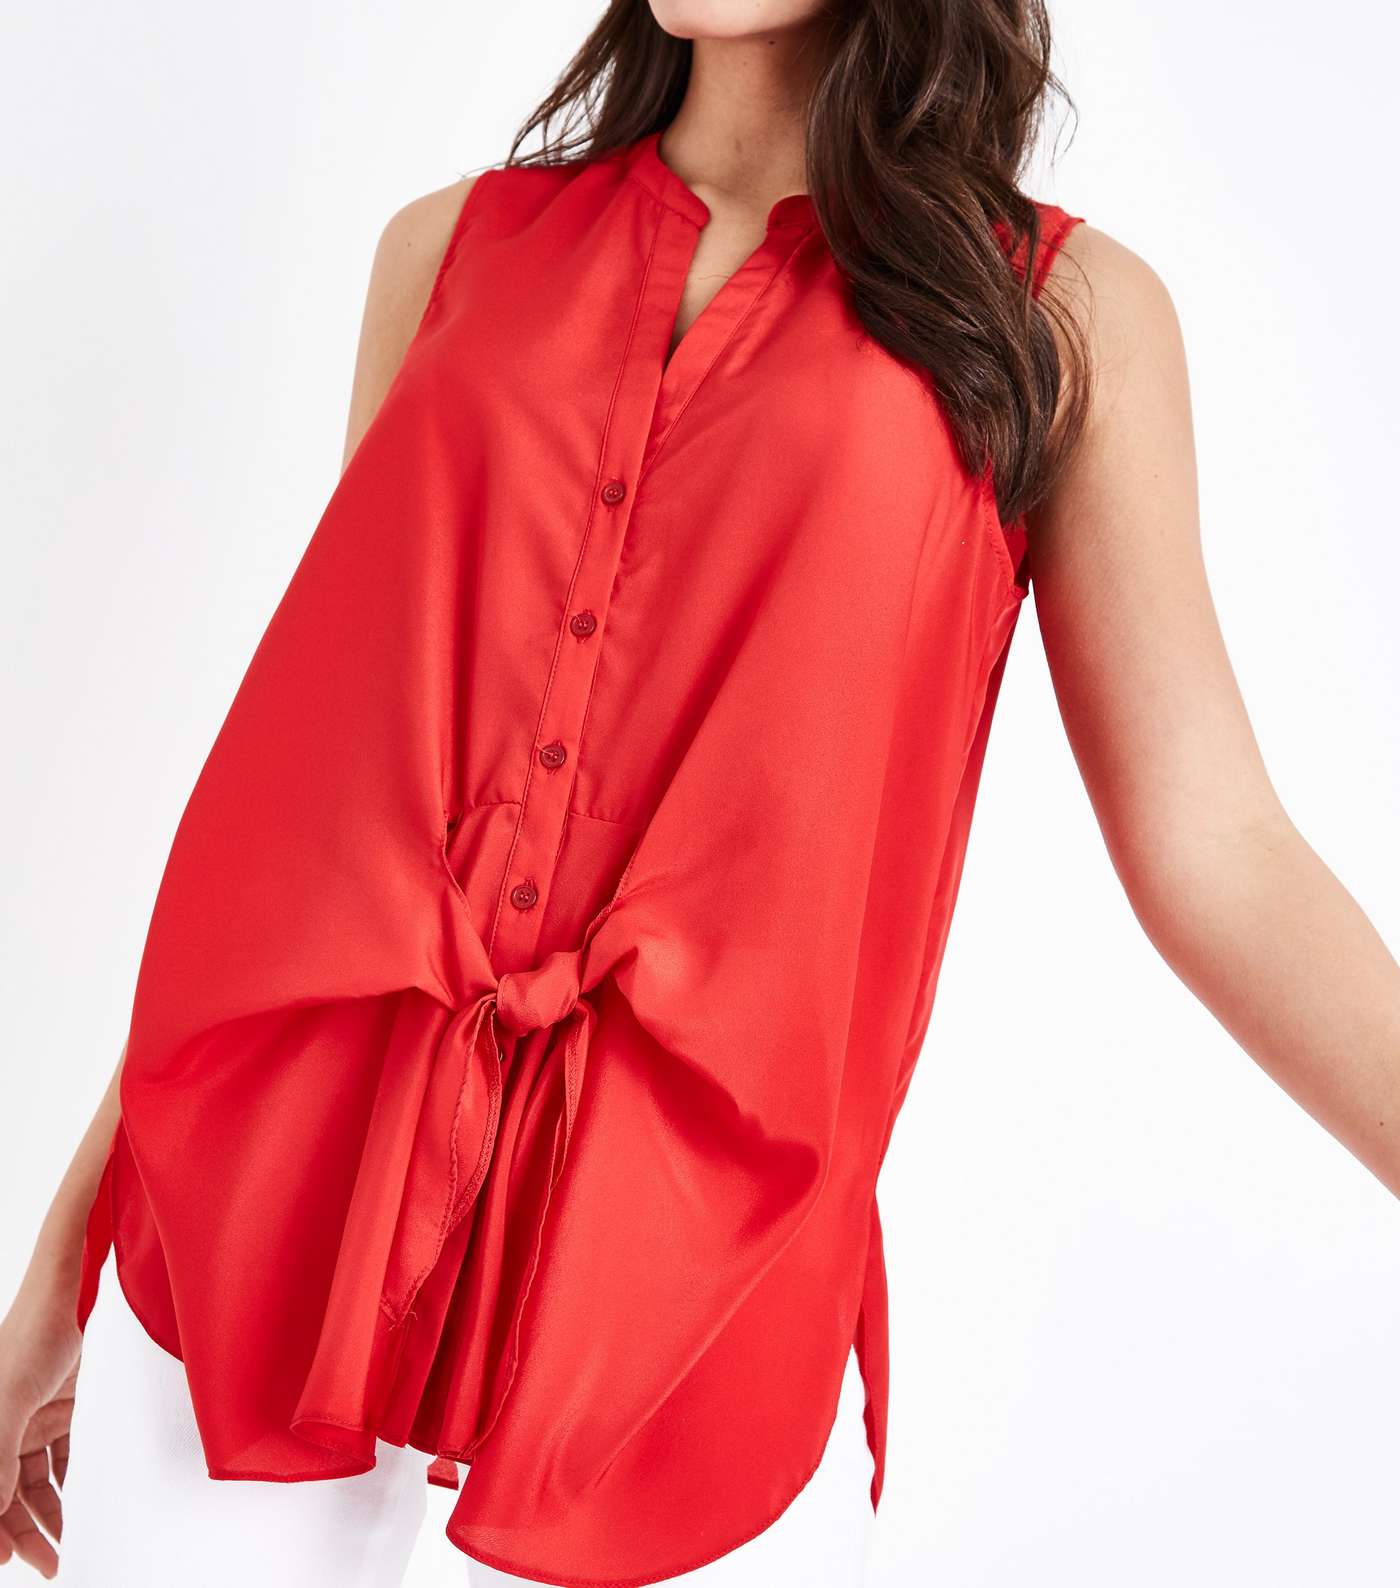 Red Tie Front Sleeveless Shirt Image 5